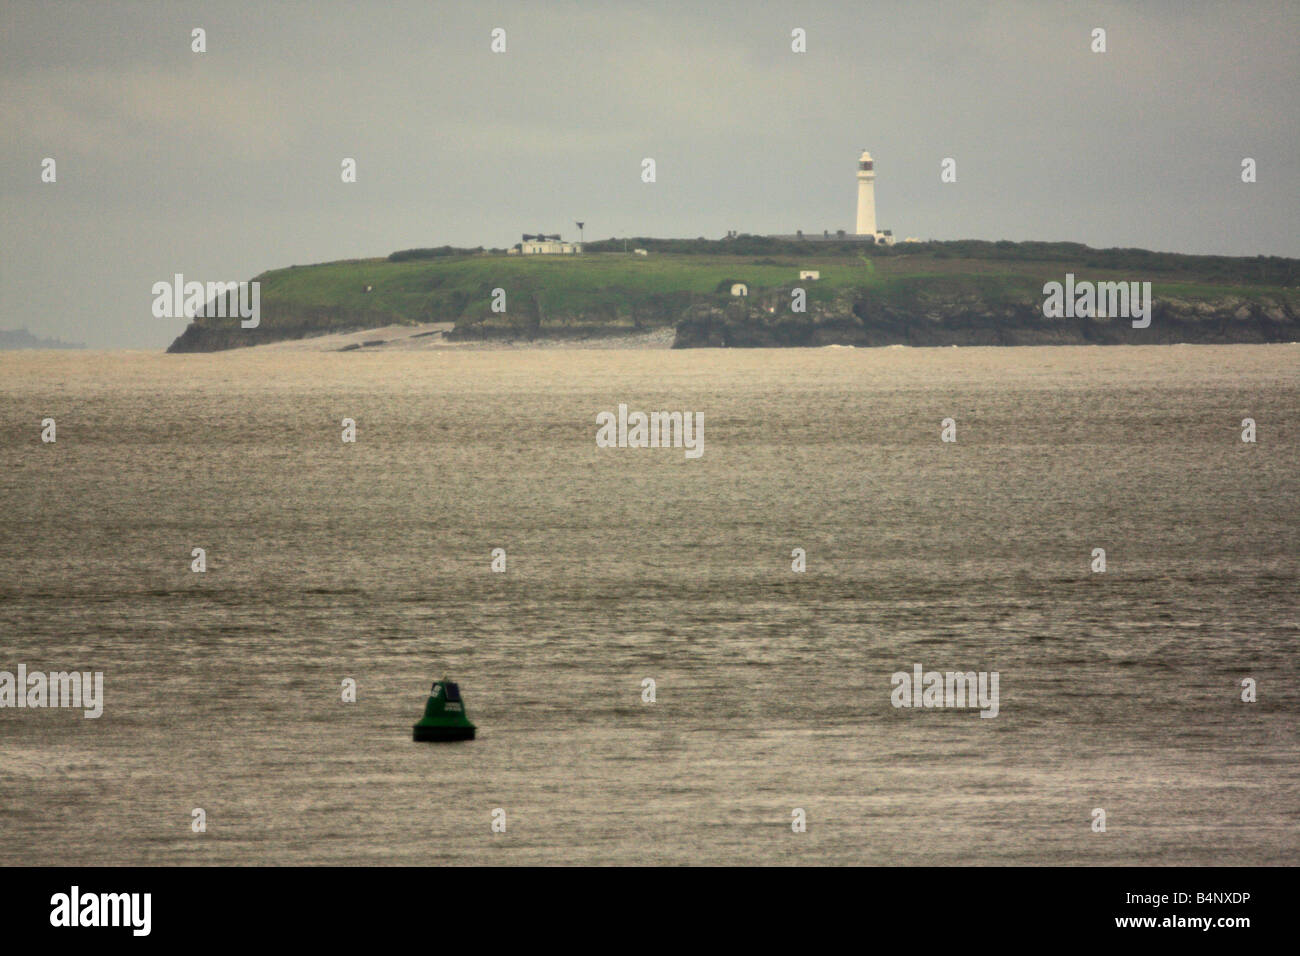 Flat Holm island viewed from the Cardiff Bay Barrage, Wales, U.K. Stock Photo